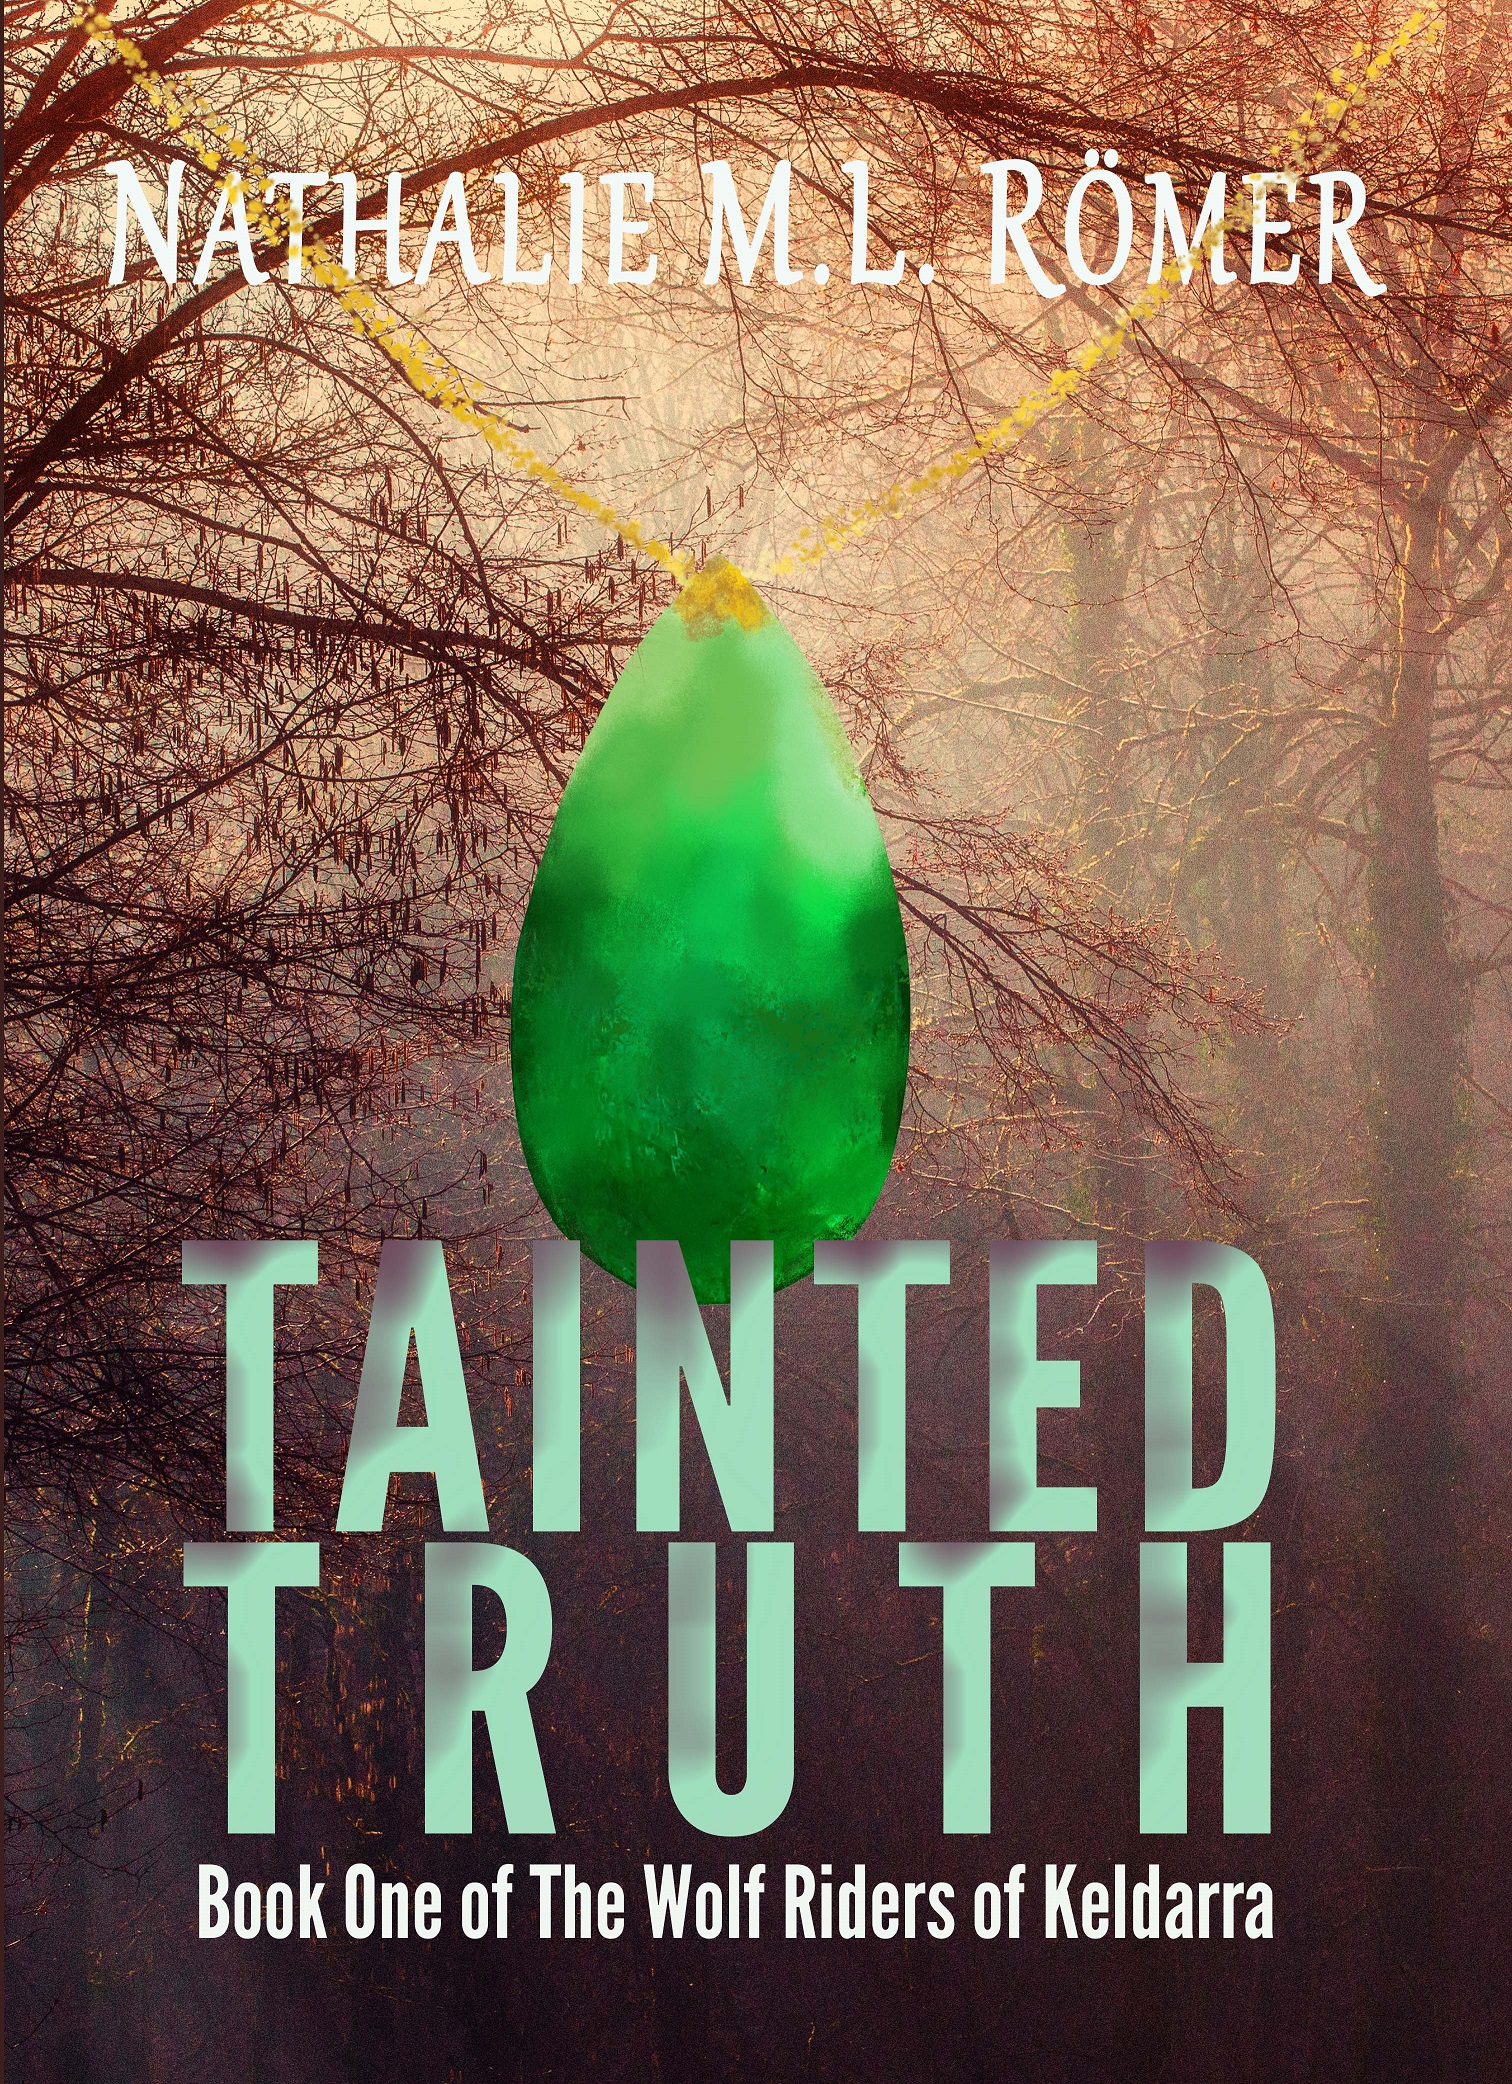 Tainted Truth by Nathalie M.L. Römer